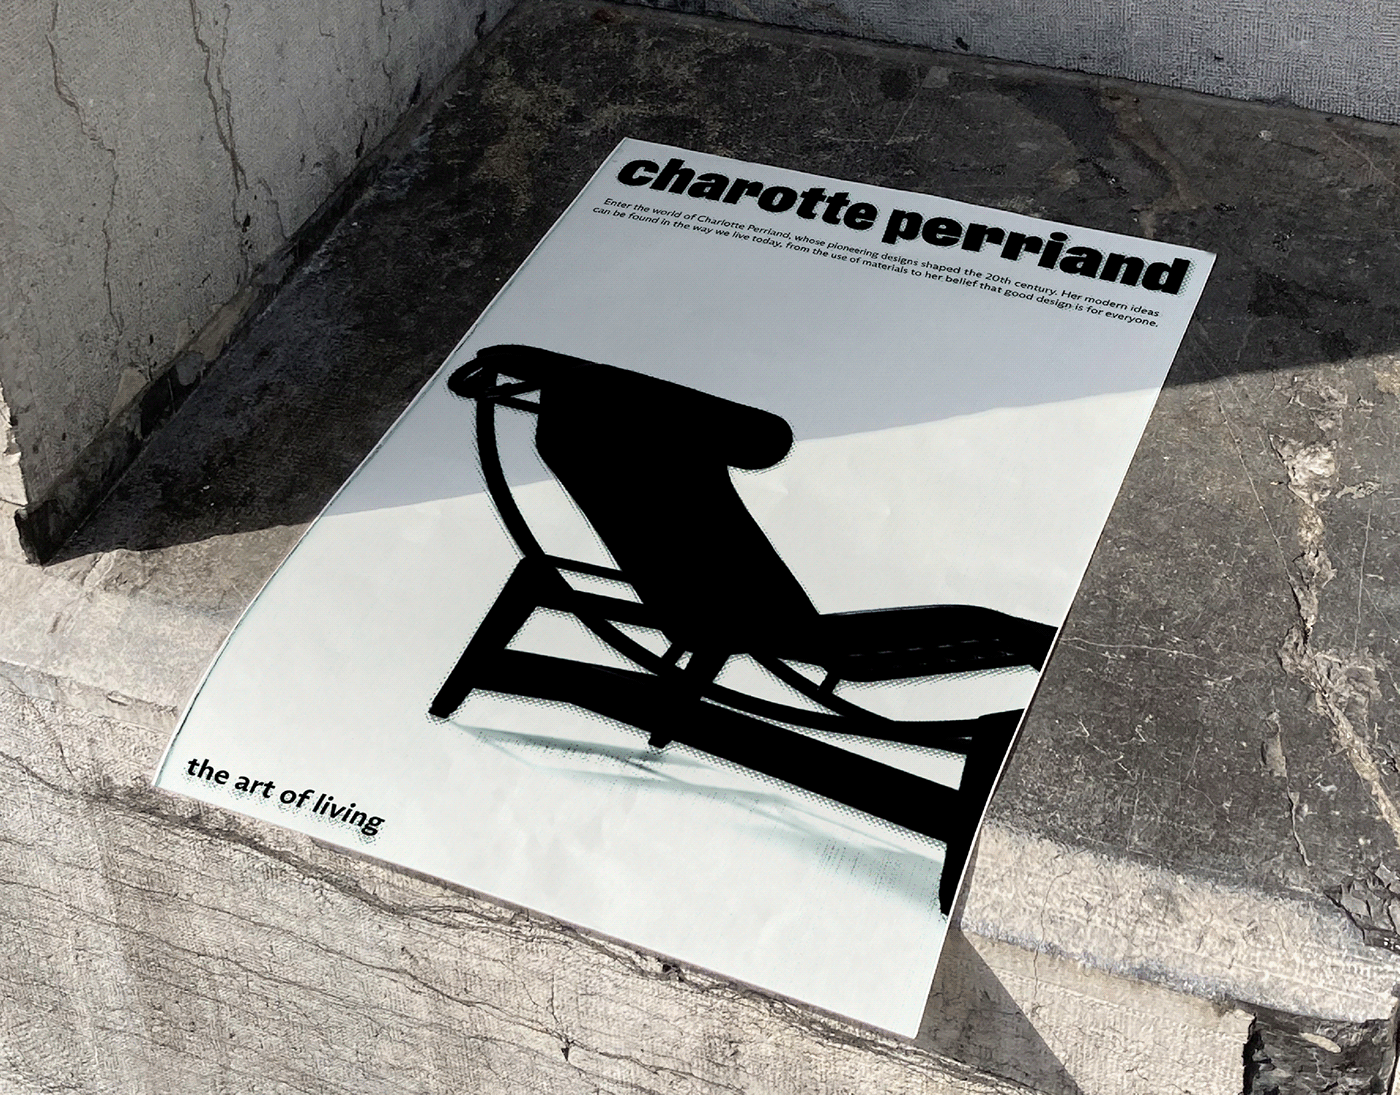 Charlotte Perriand: 7 things to know about the pioneering designer